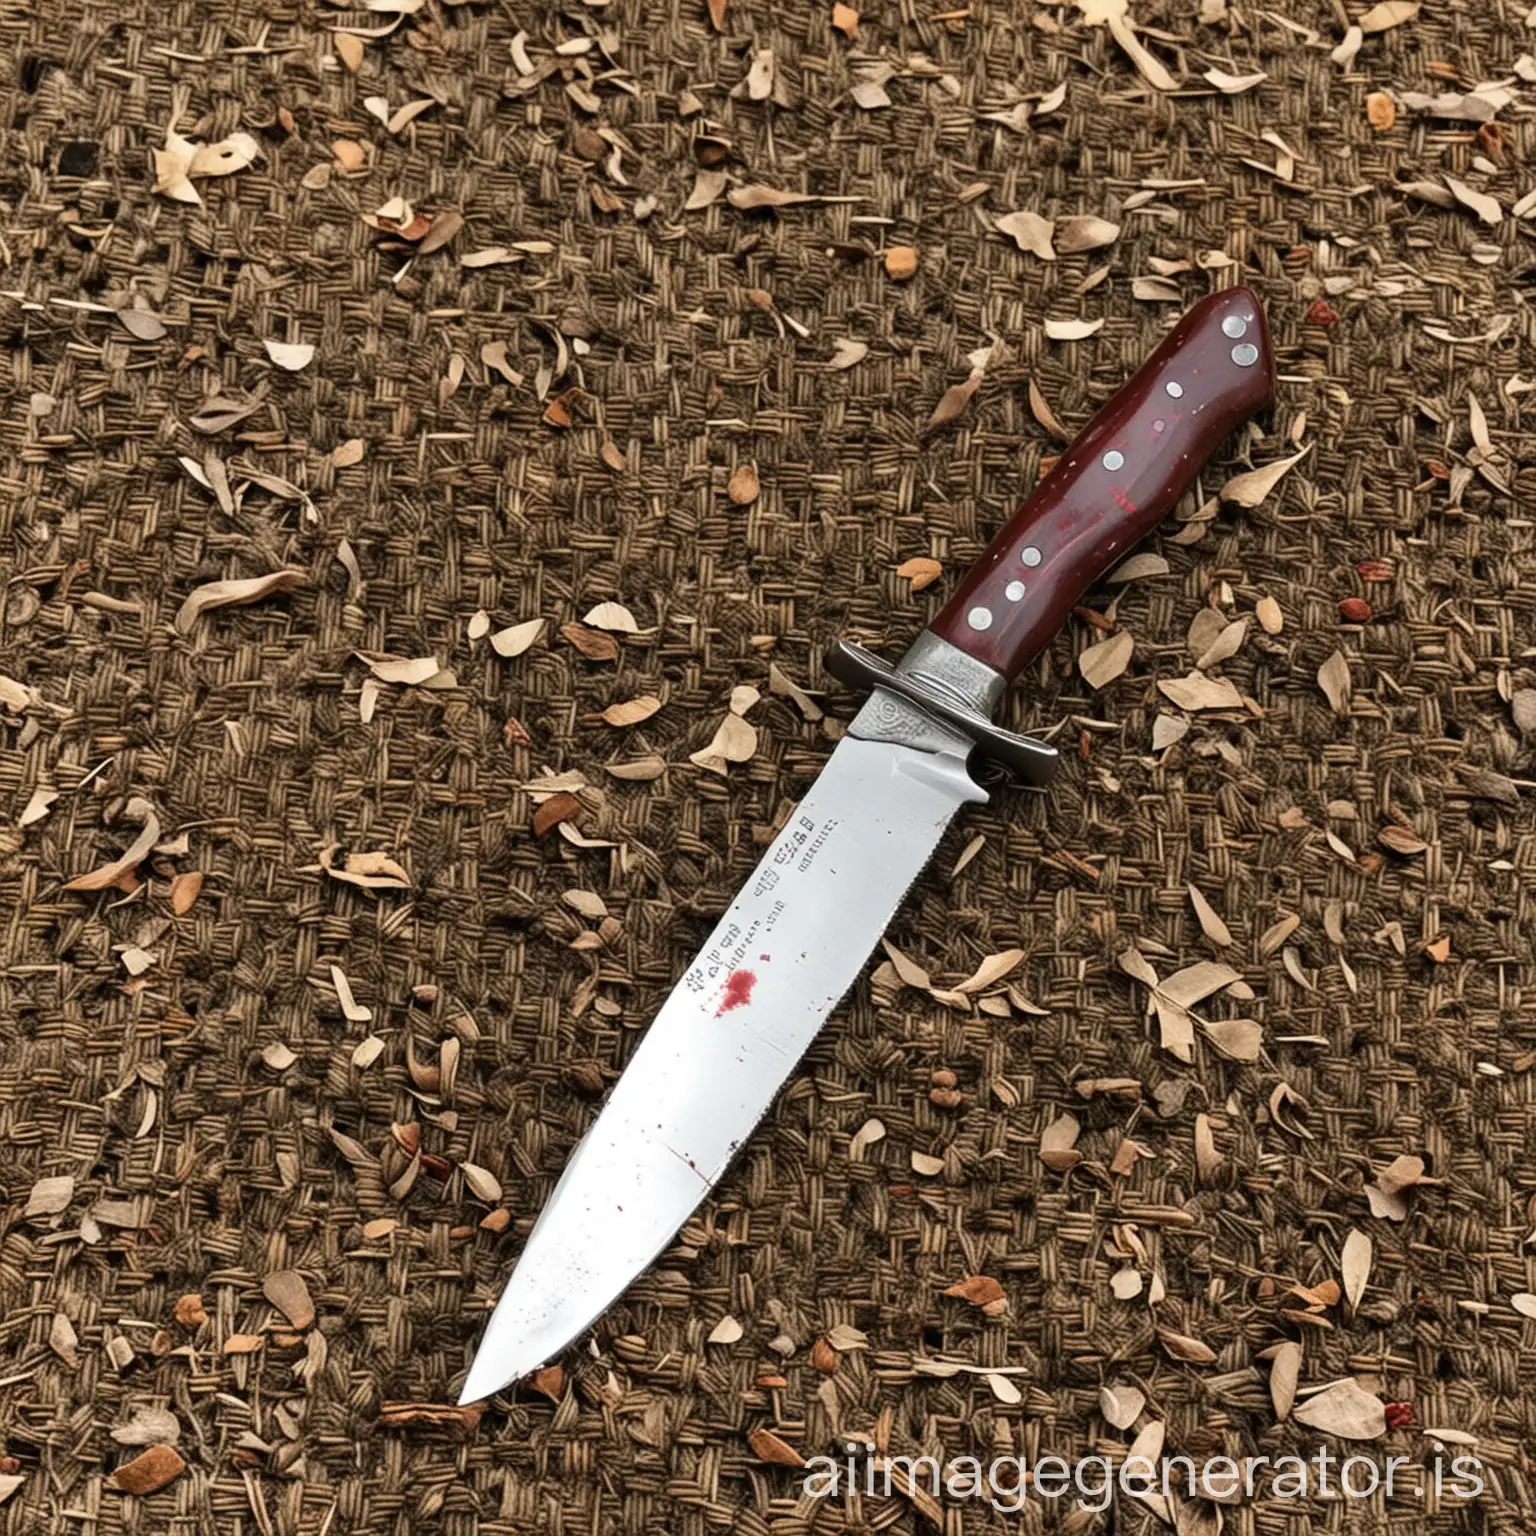 12.	A knife with Mr. Kelly’s blood on it was found in Miss Kathryn’s yard. 

